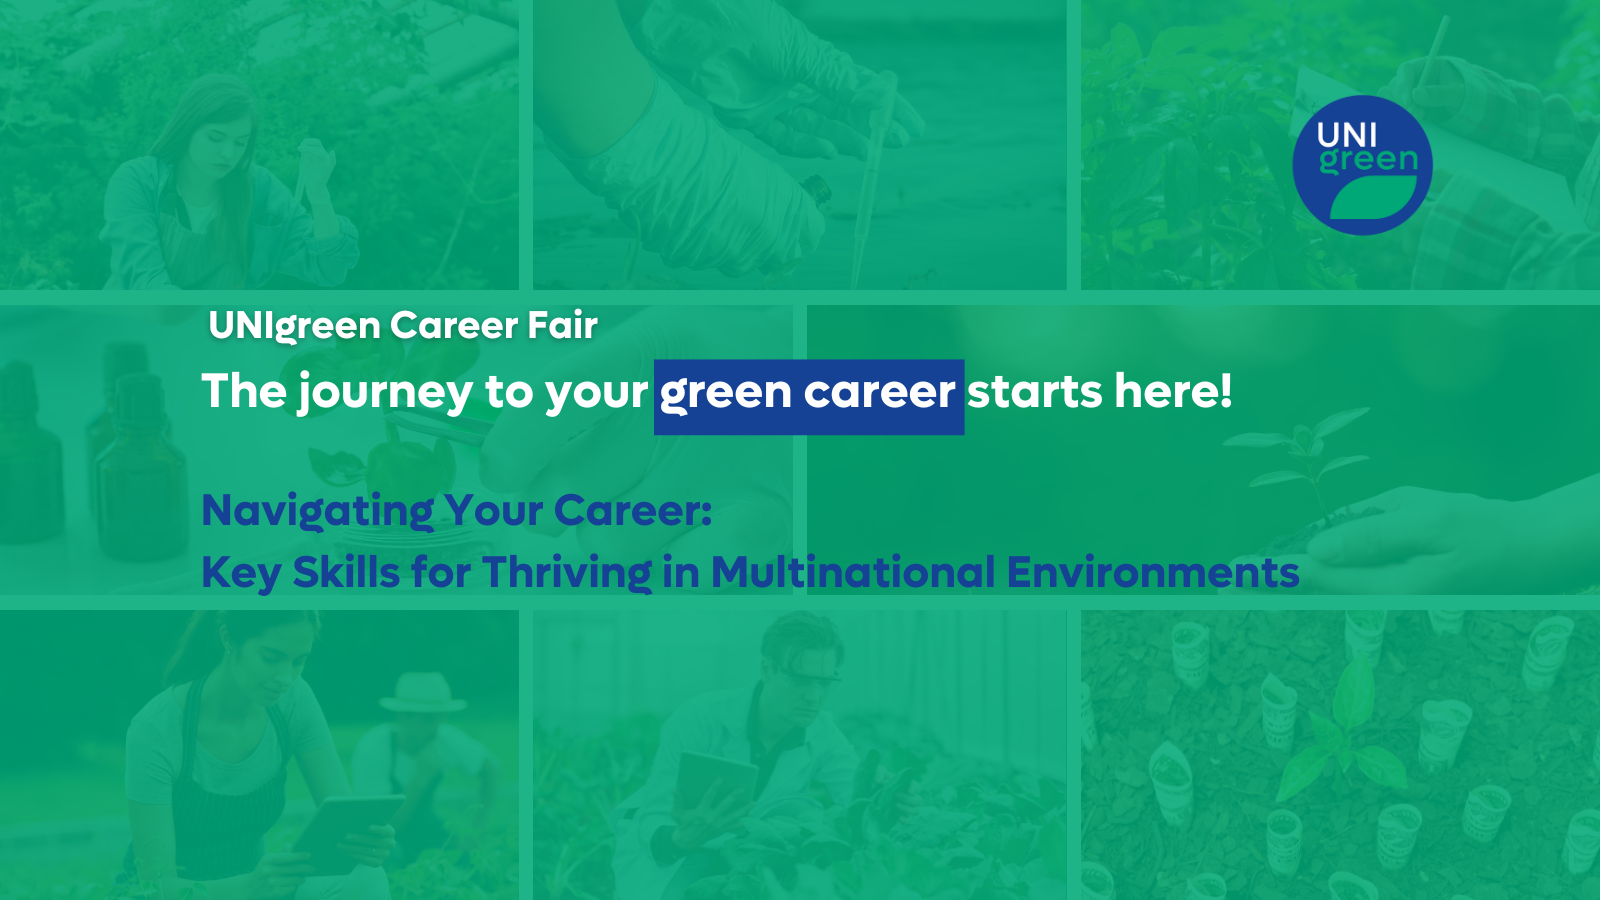 UNIgreen Career Fair: Insights and Conclusions